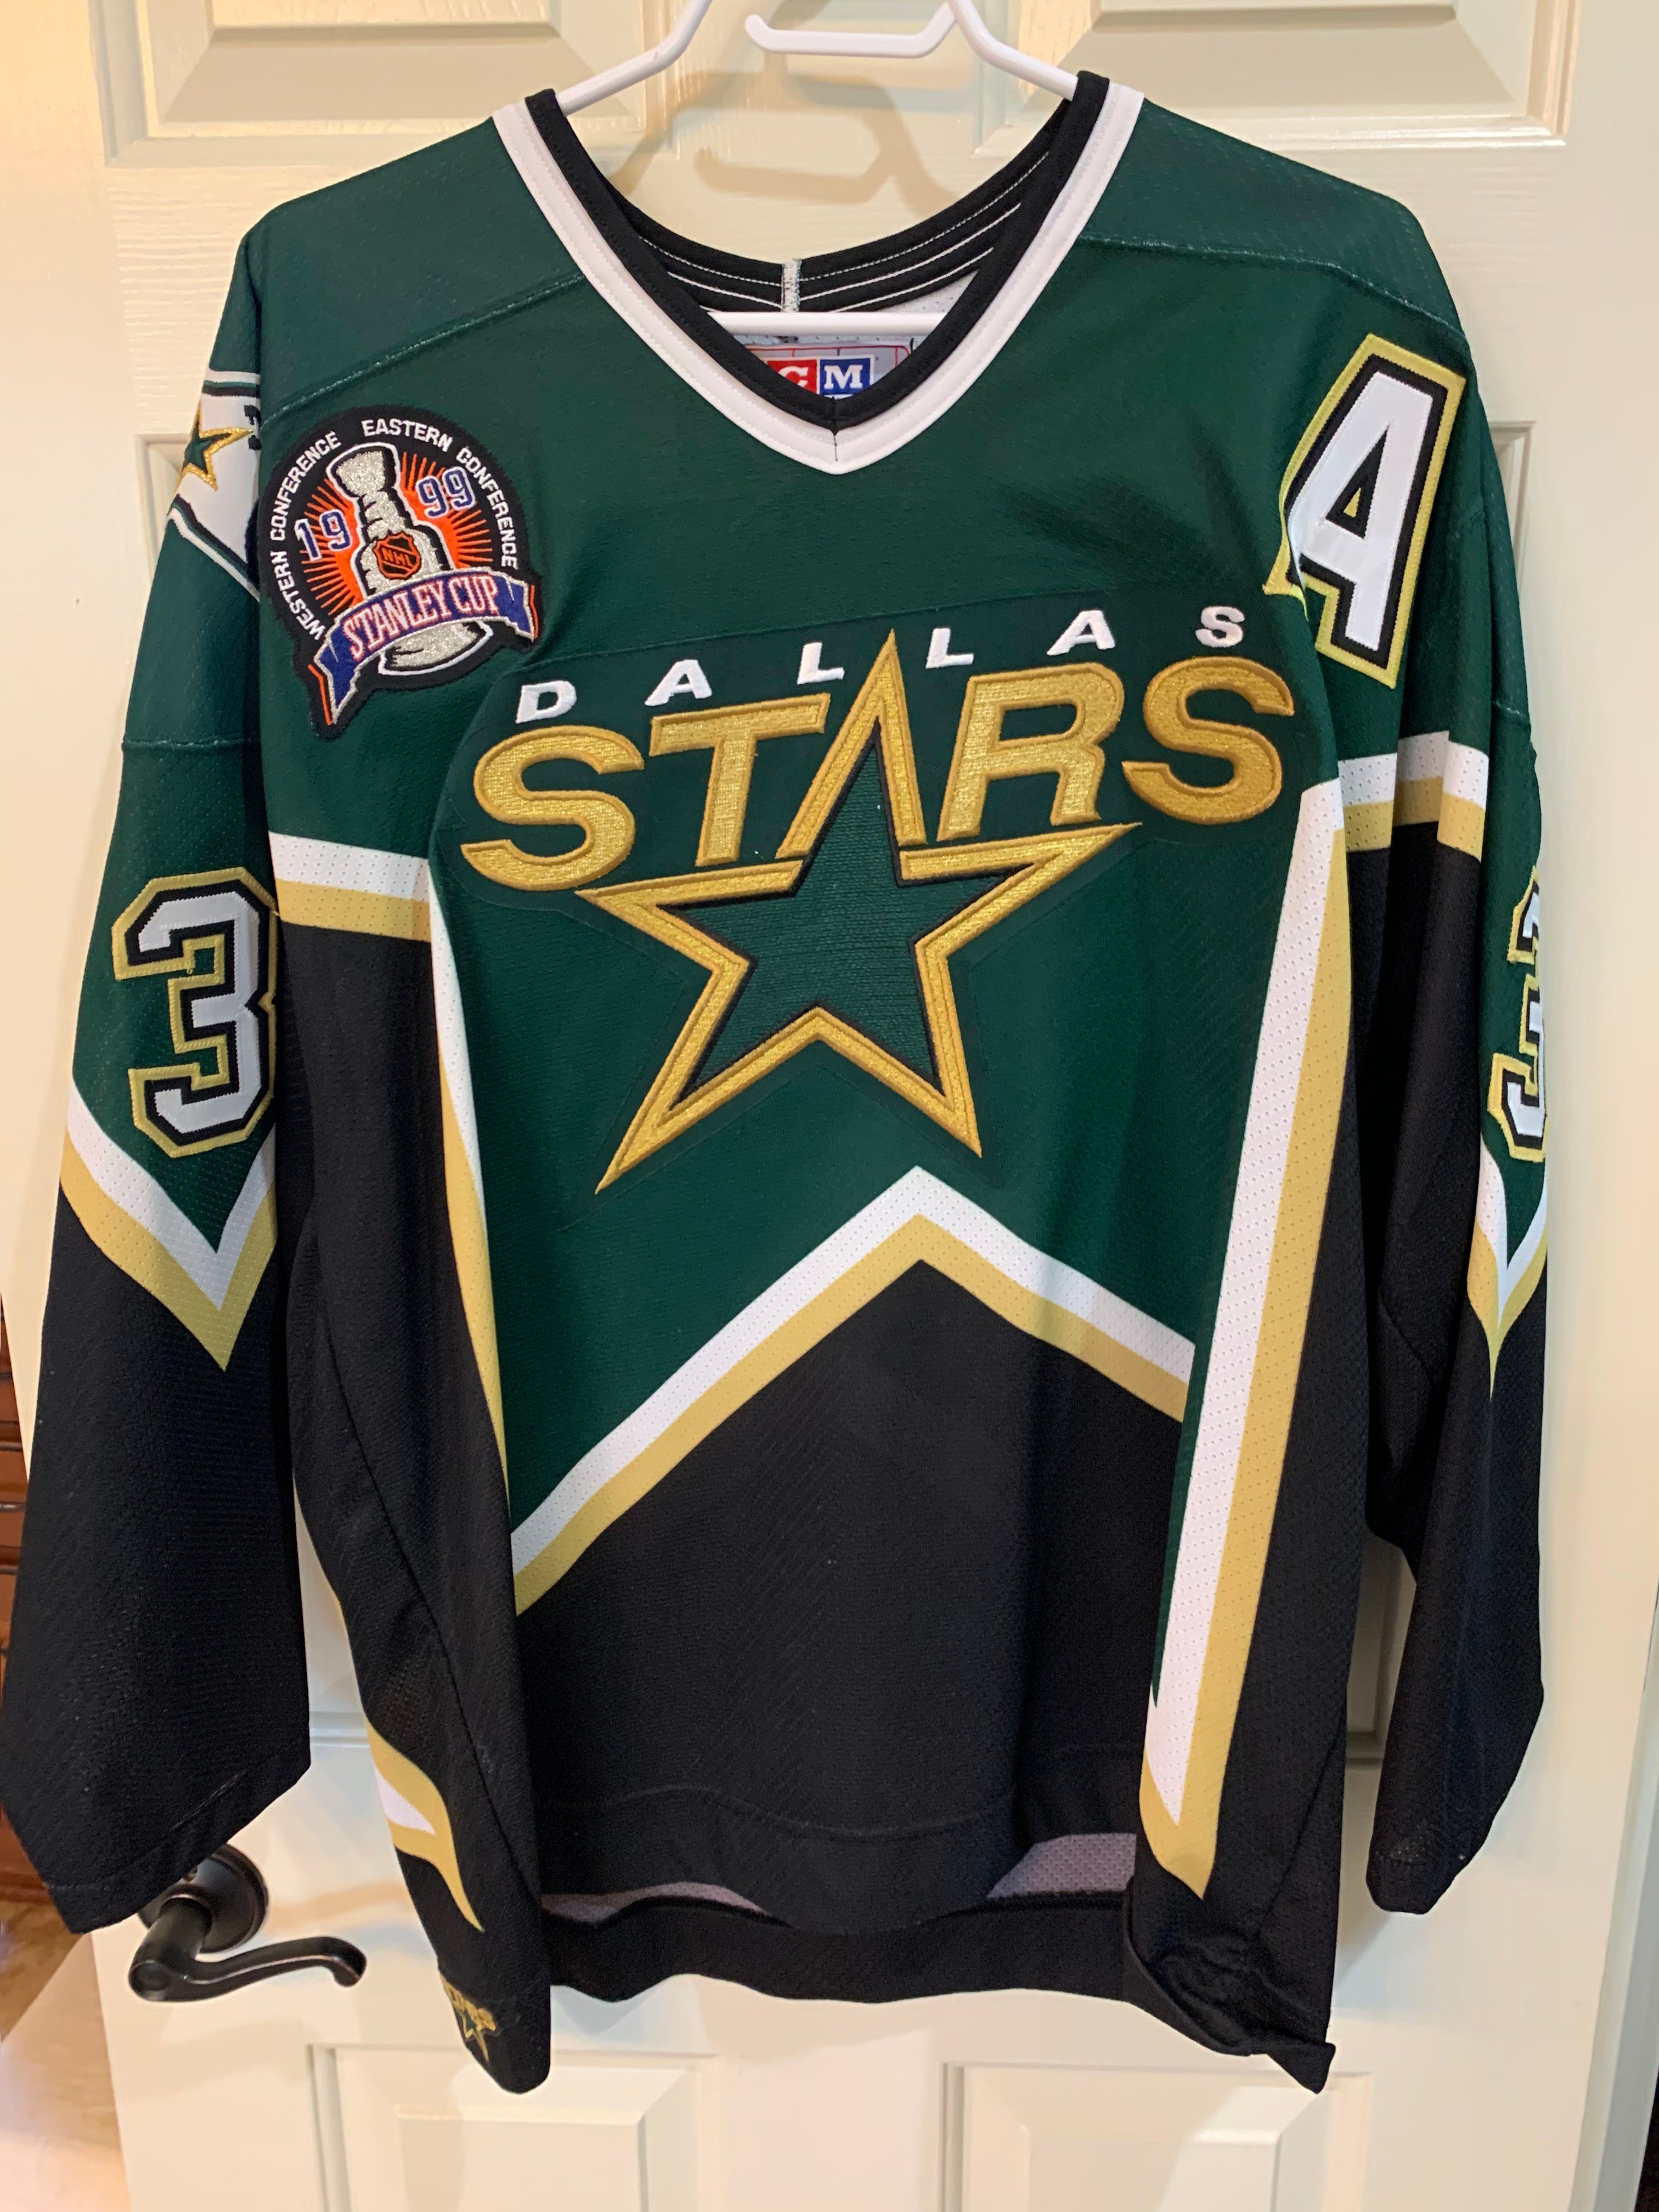 Dallas Stars on X: How does the 1999-2007 jersey rank among the